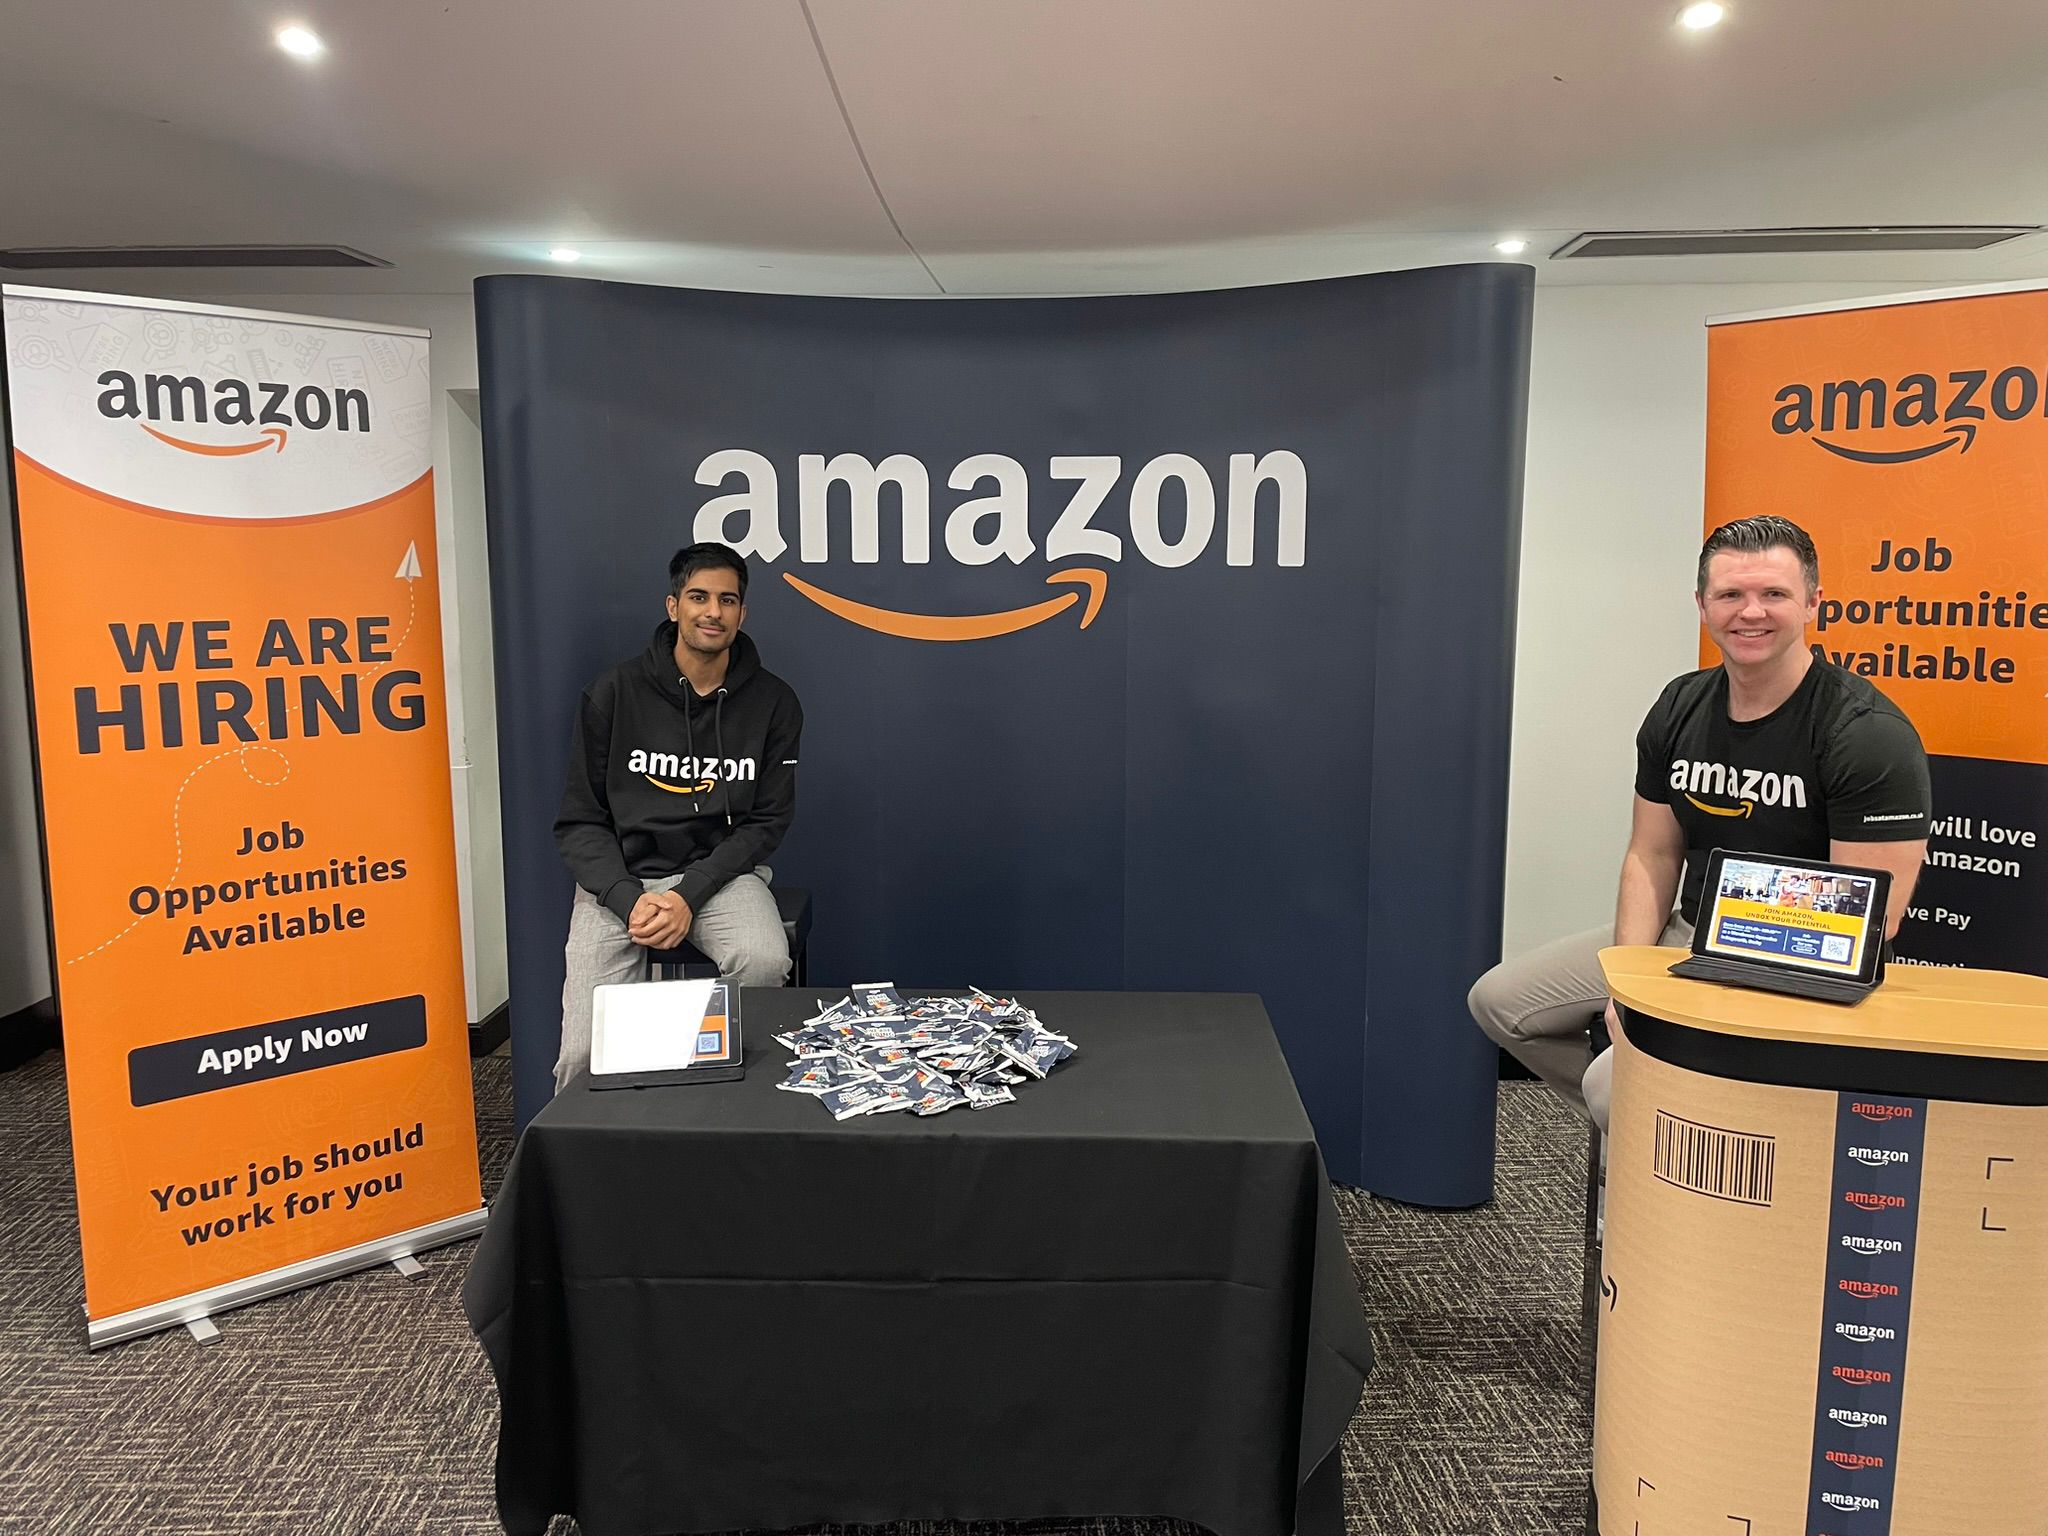 Amazon at our event in Derby